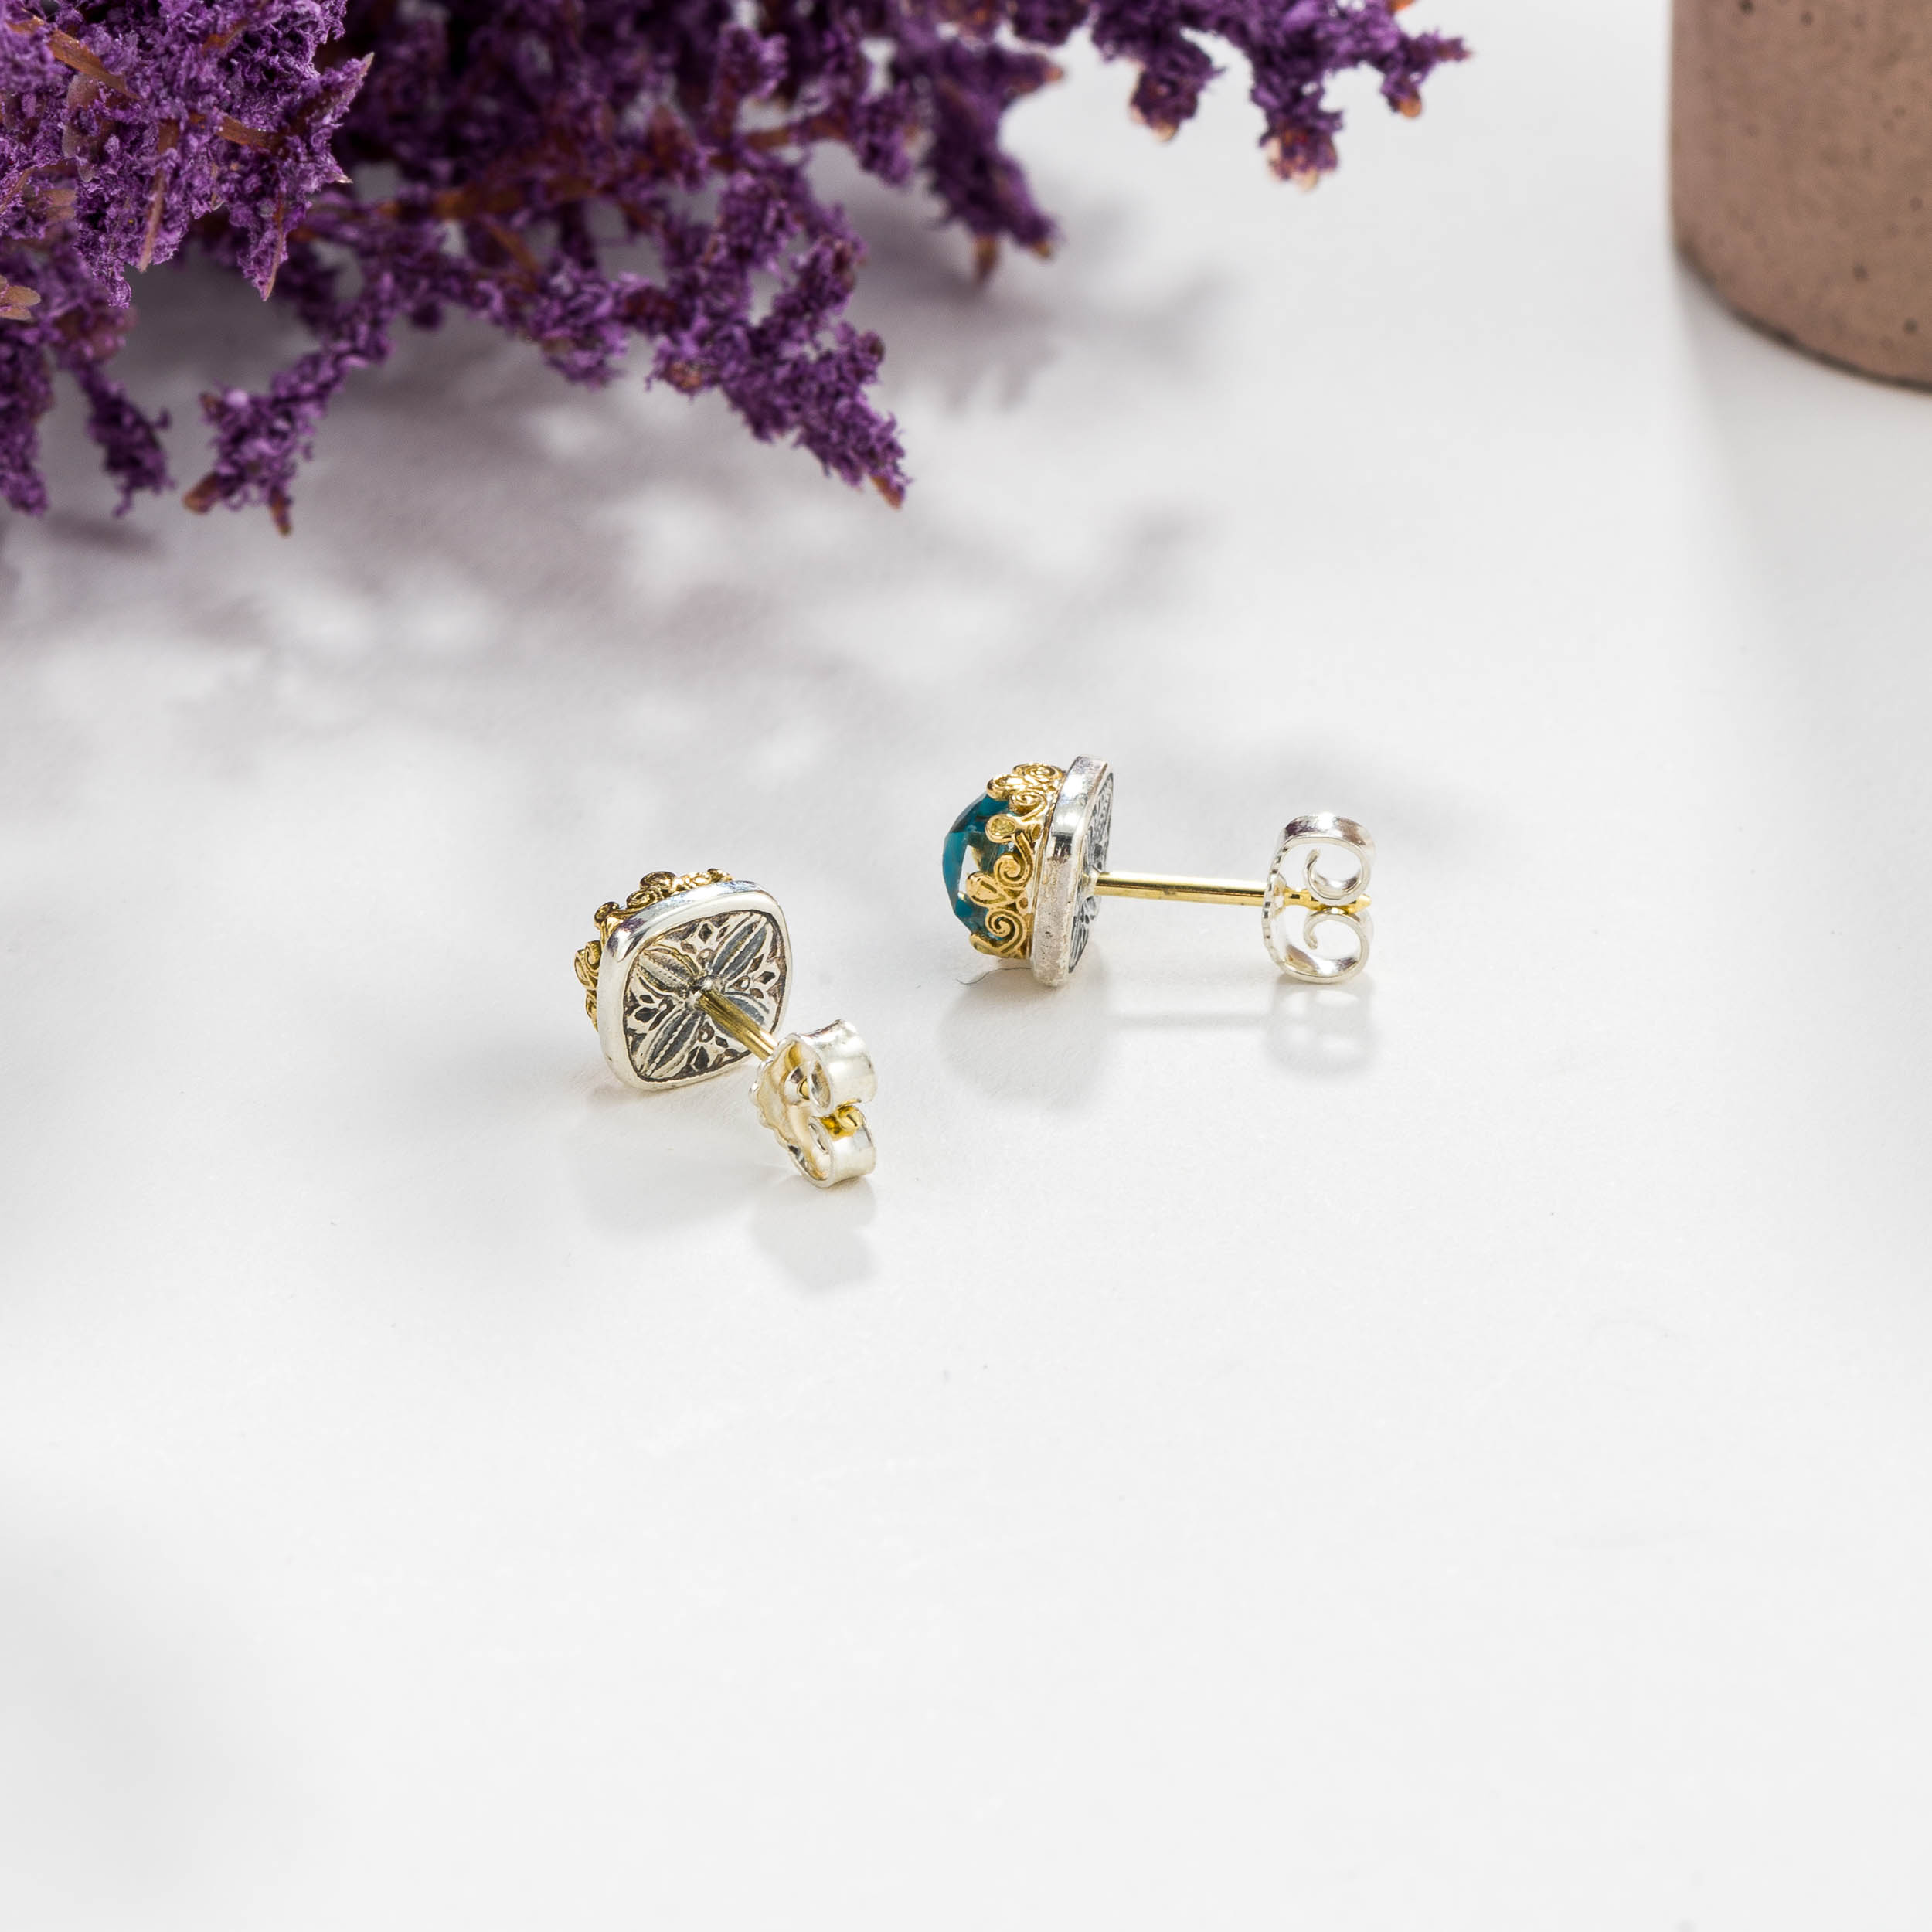 Aegean colors stud earrings in 18K Gold and Sterling Silver with doublet stone